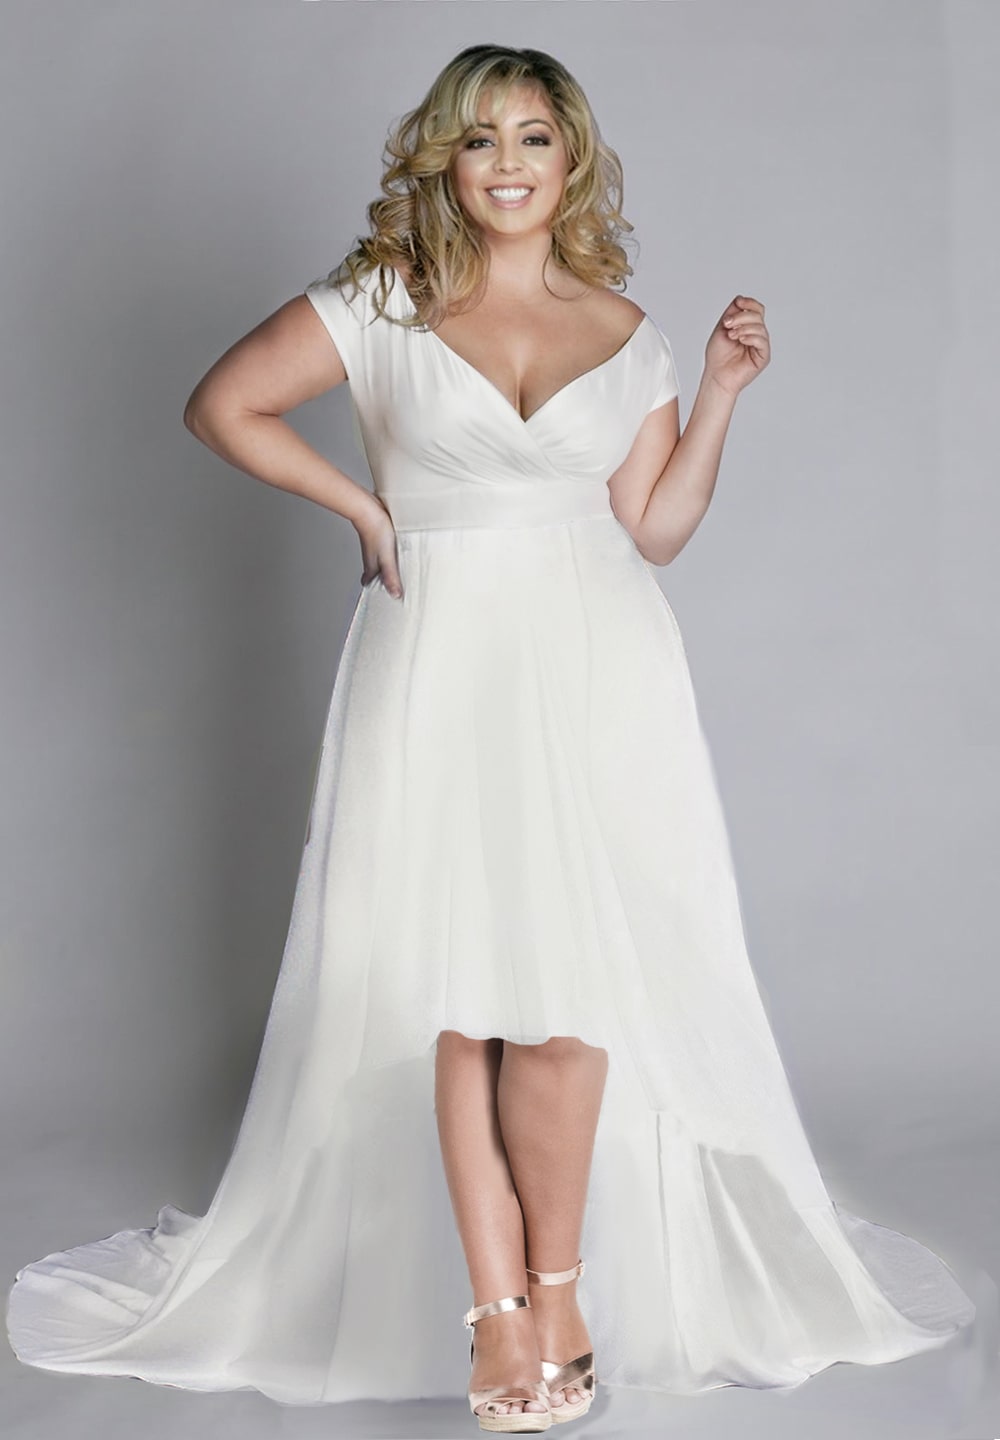 Find the Perfect Designer Wedding Dress | Jessica Couture – Jessica Couture